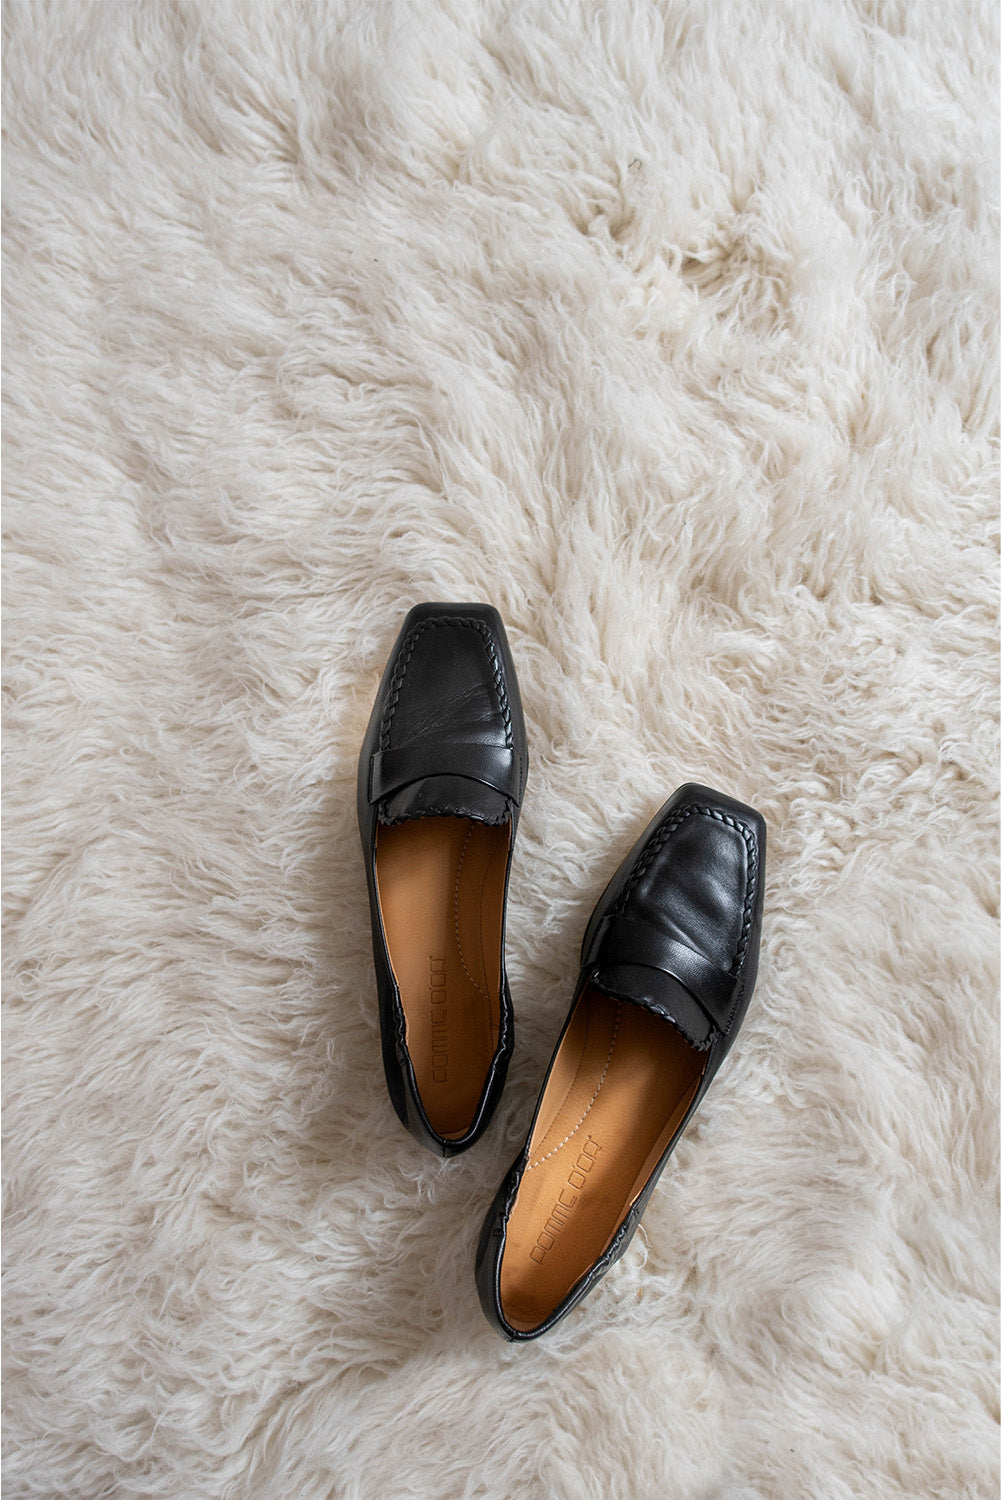 Loafer Tracy 421 | Black Leather